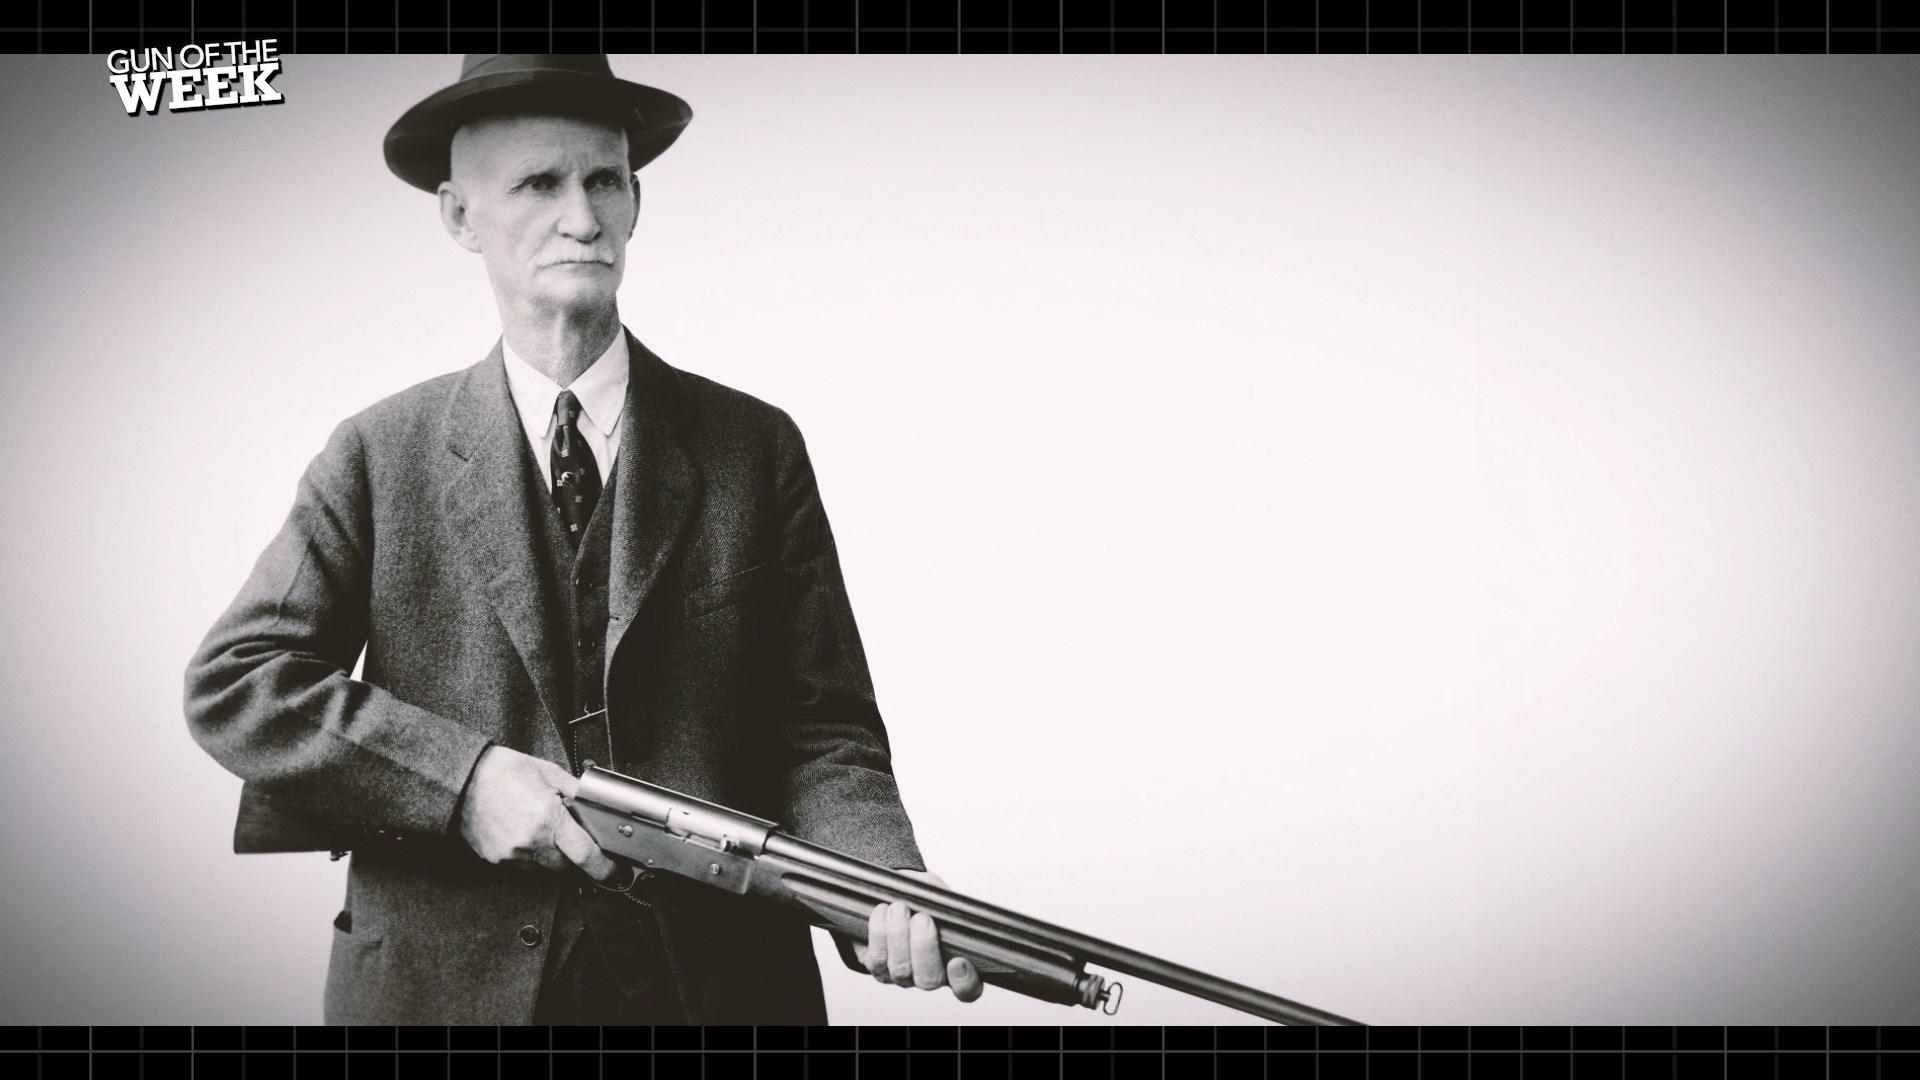 John Moses Browning in three-piece suit and hat holding Auto-5 semi-automatic shotgun text on image noting GUN OF THE WEEK